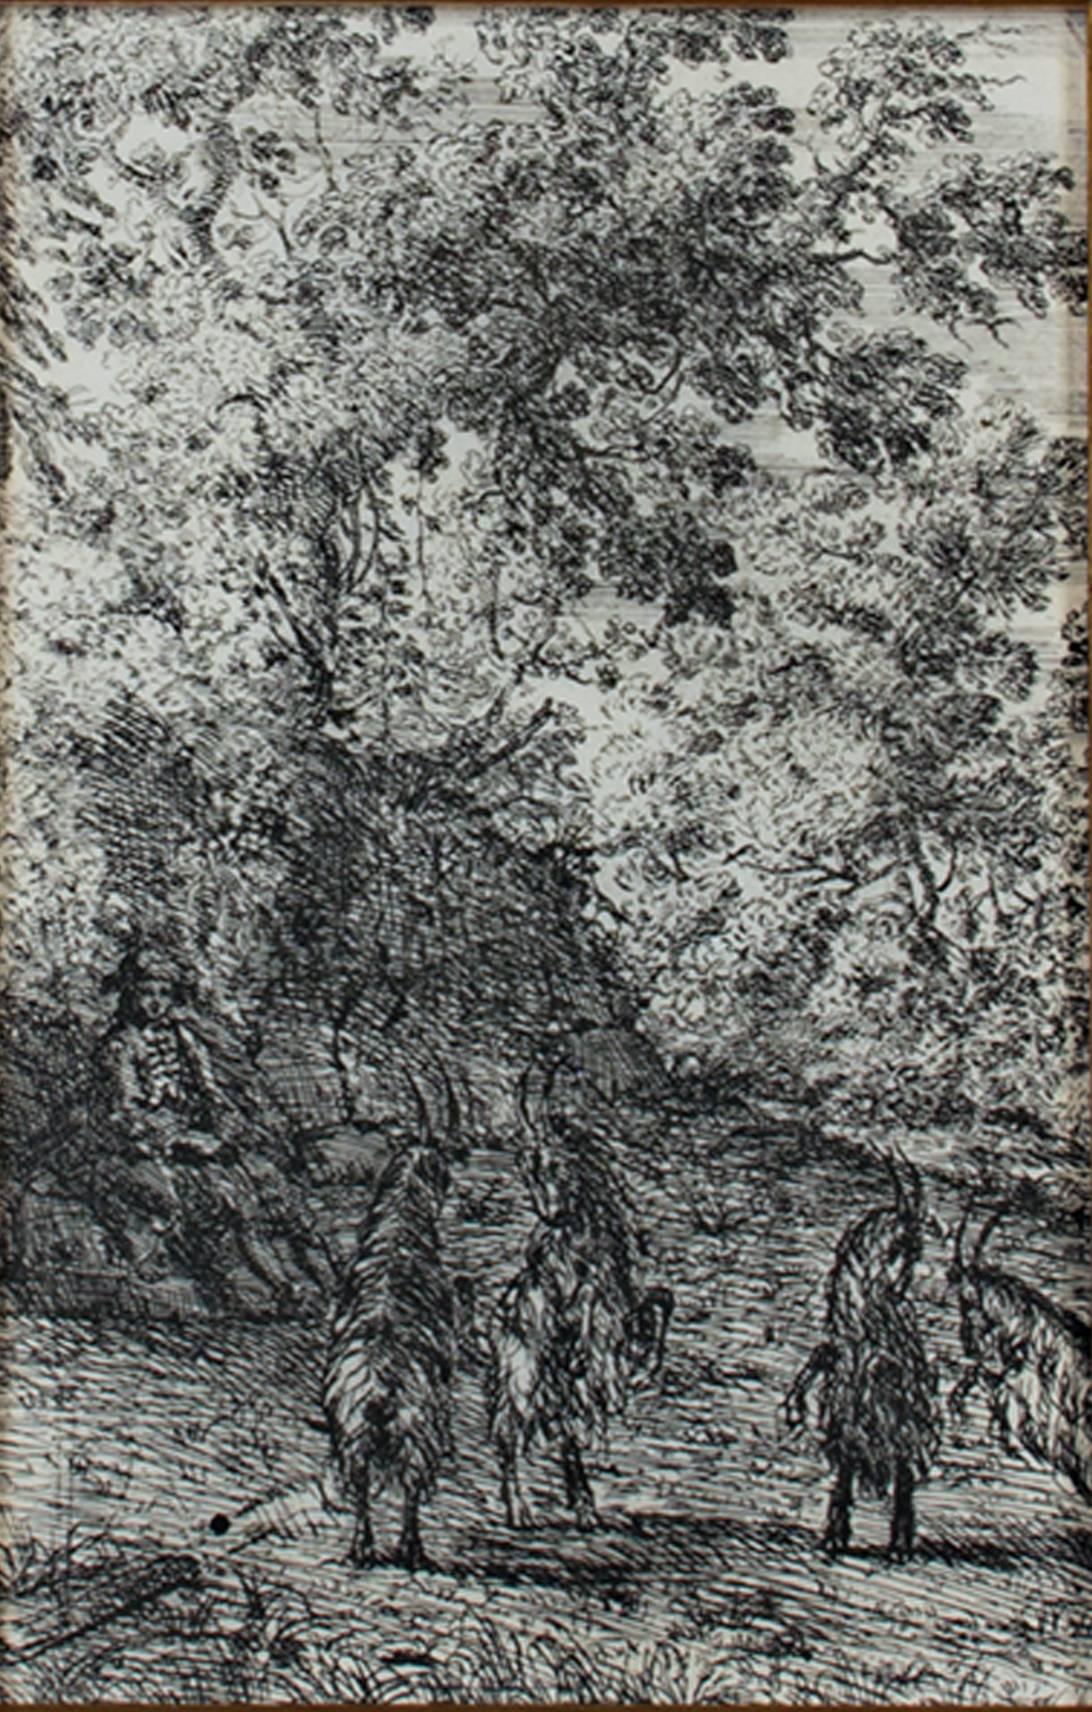 17th century etching black and white landscape scene forest trees goats